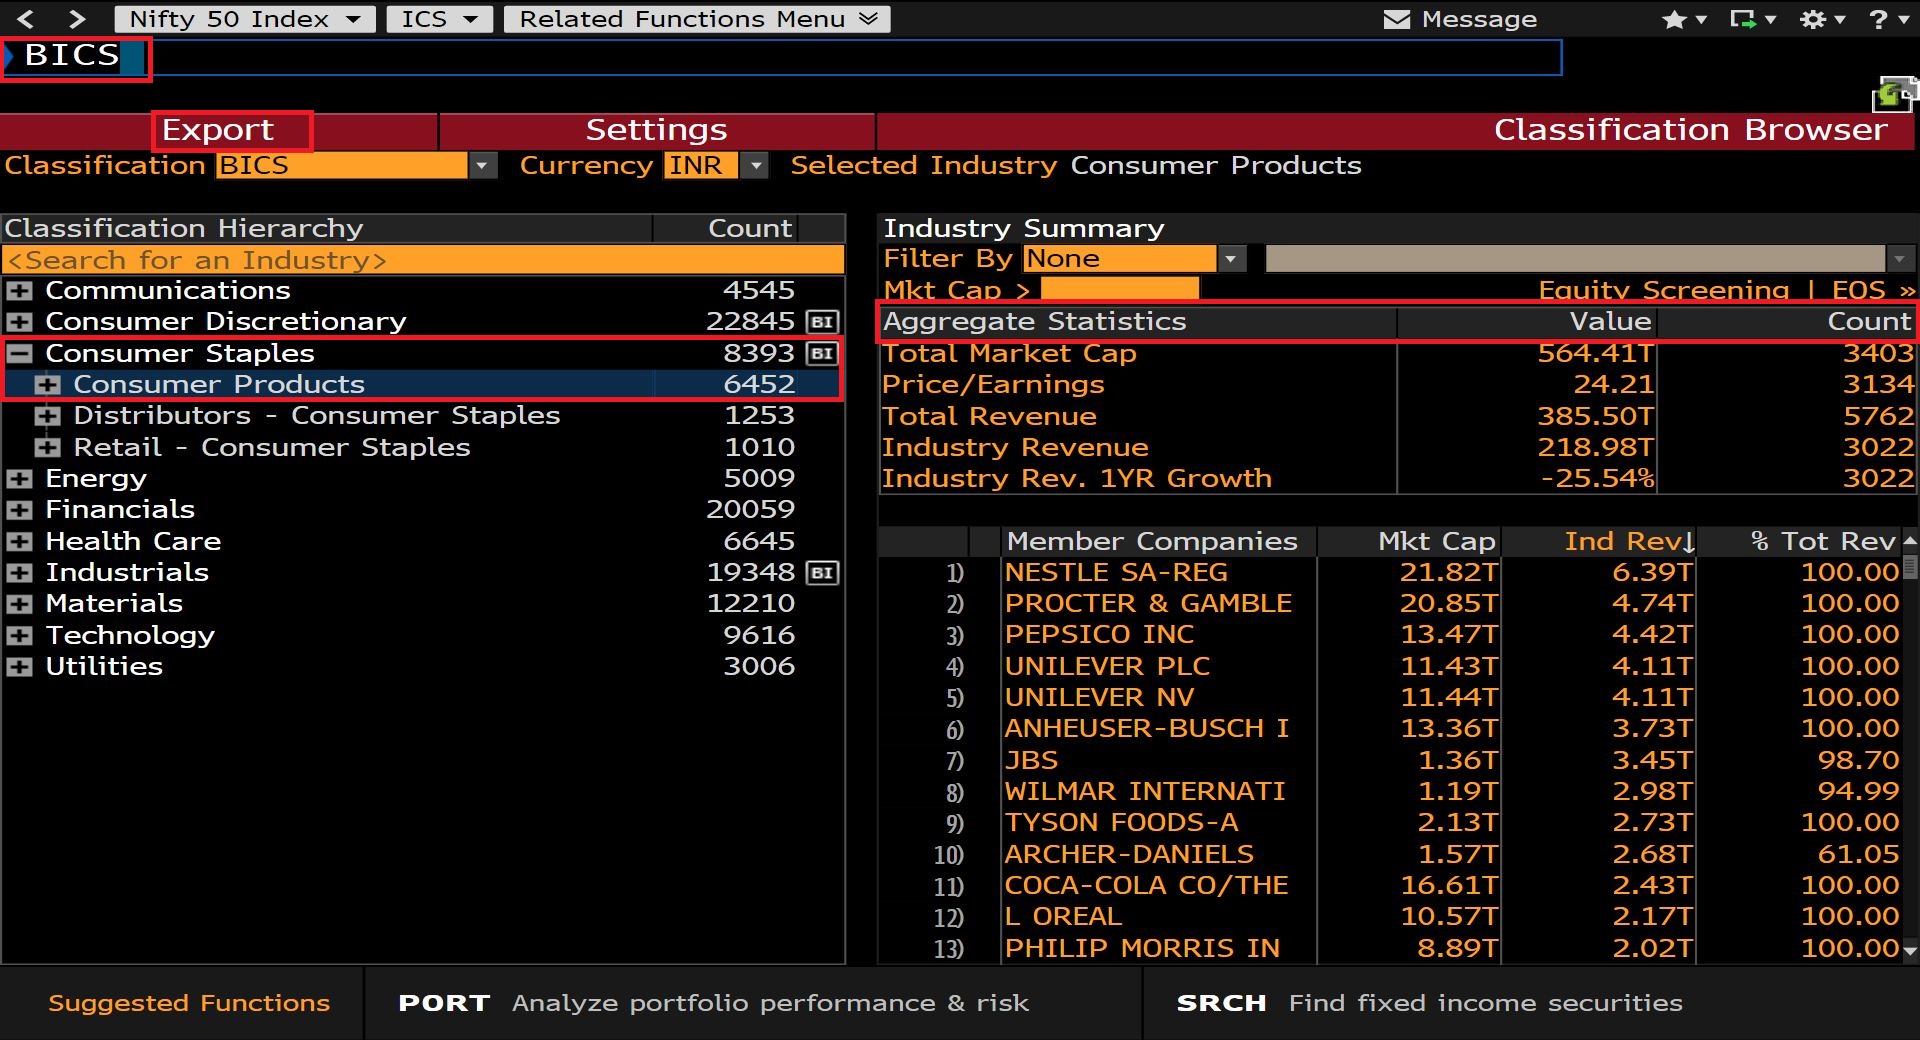 Login to Bloomberg (Available in Library) then Search for BICS and Select Consumer Staples and Click Consumer Products